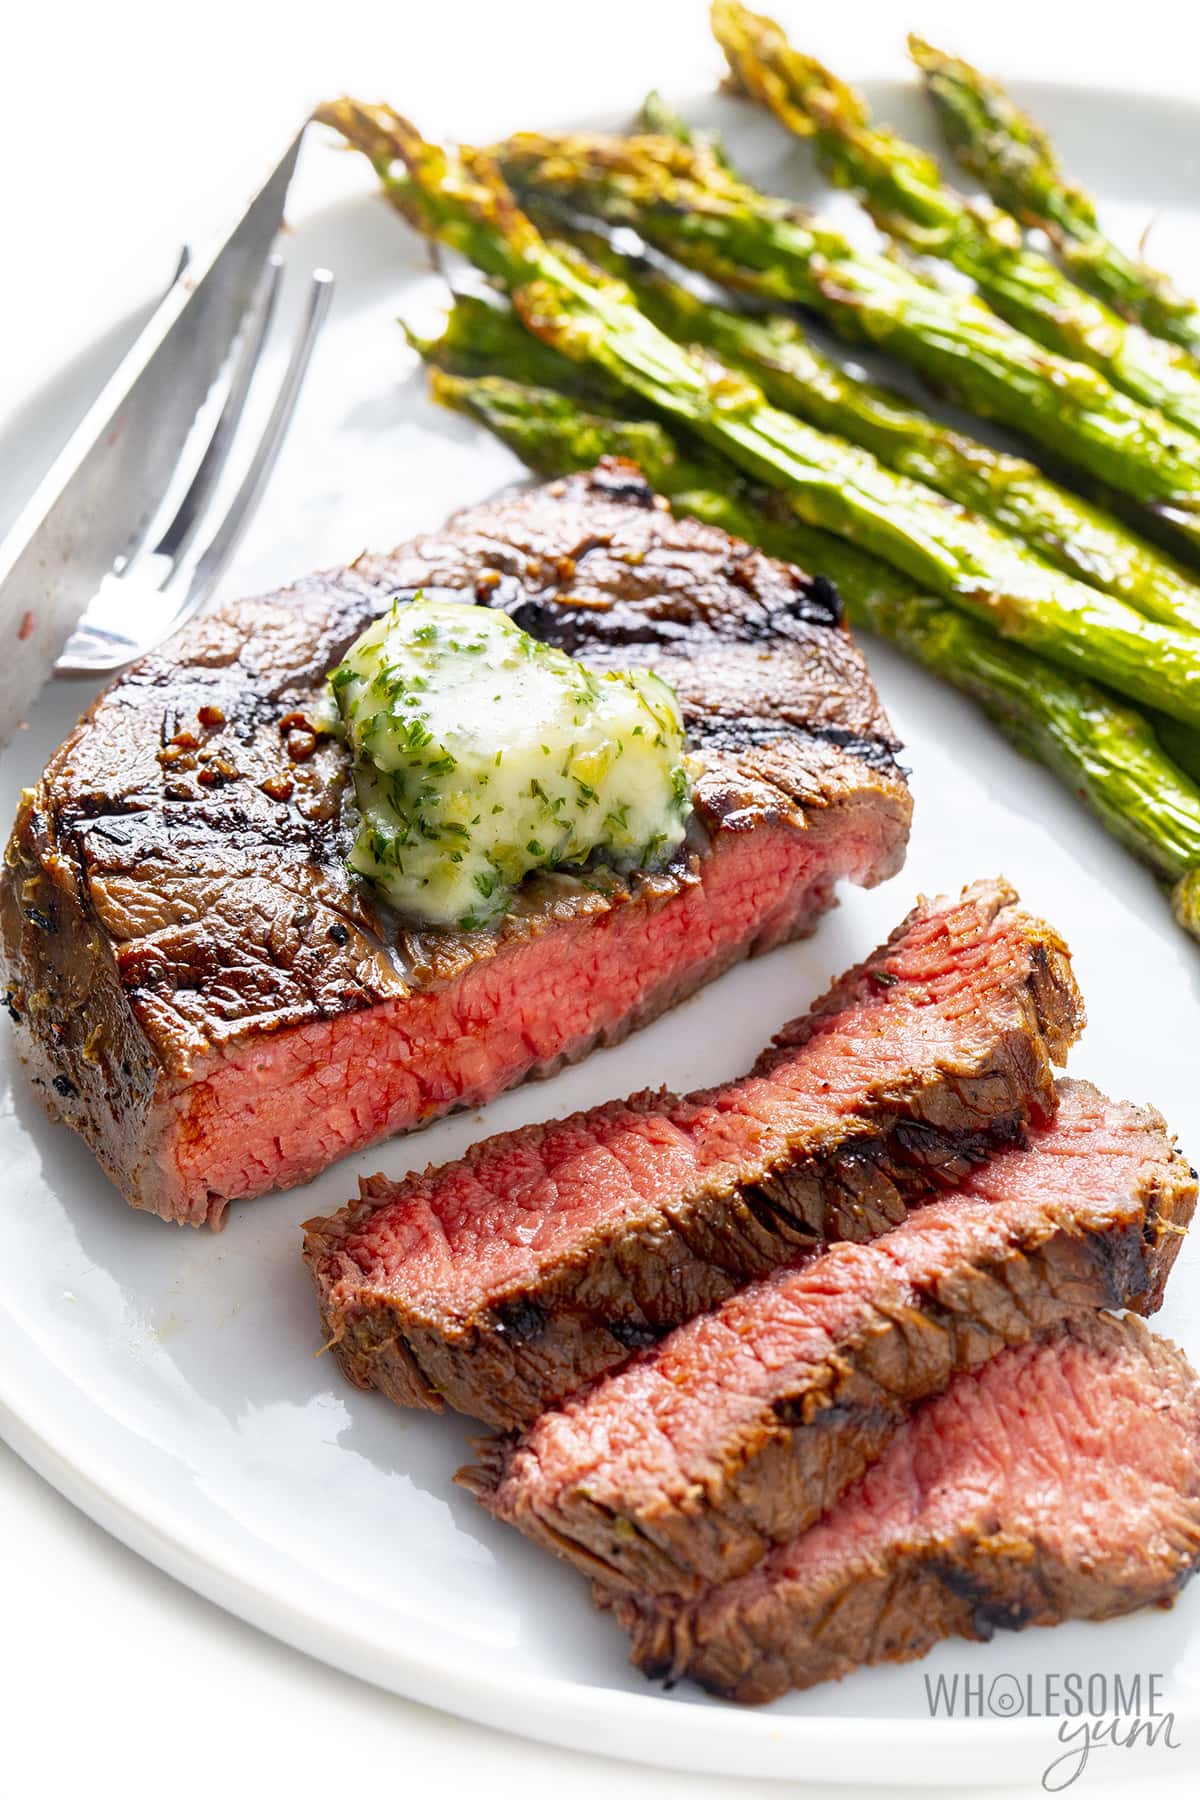 Best grilled steak plated with asparagus.